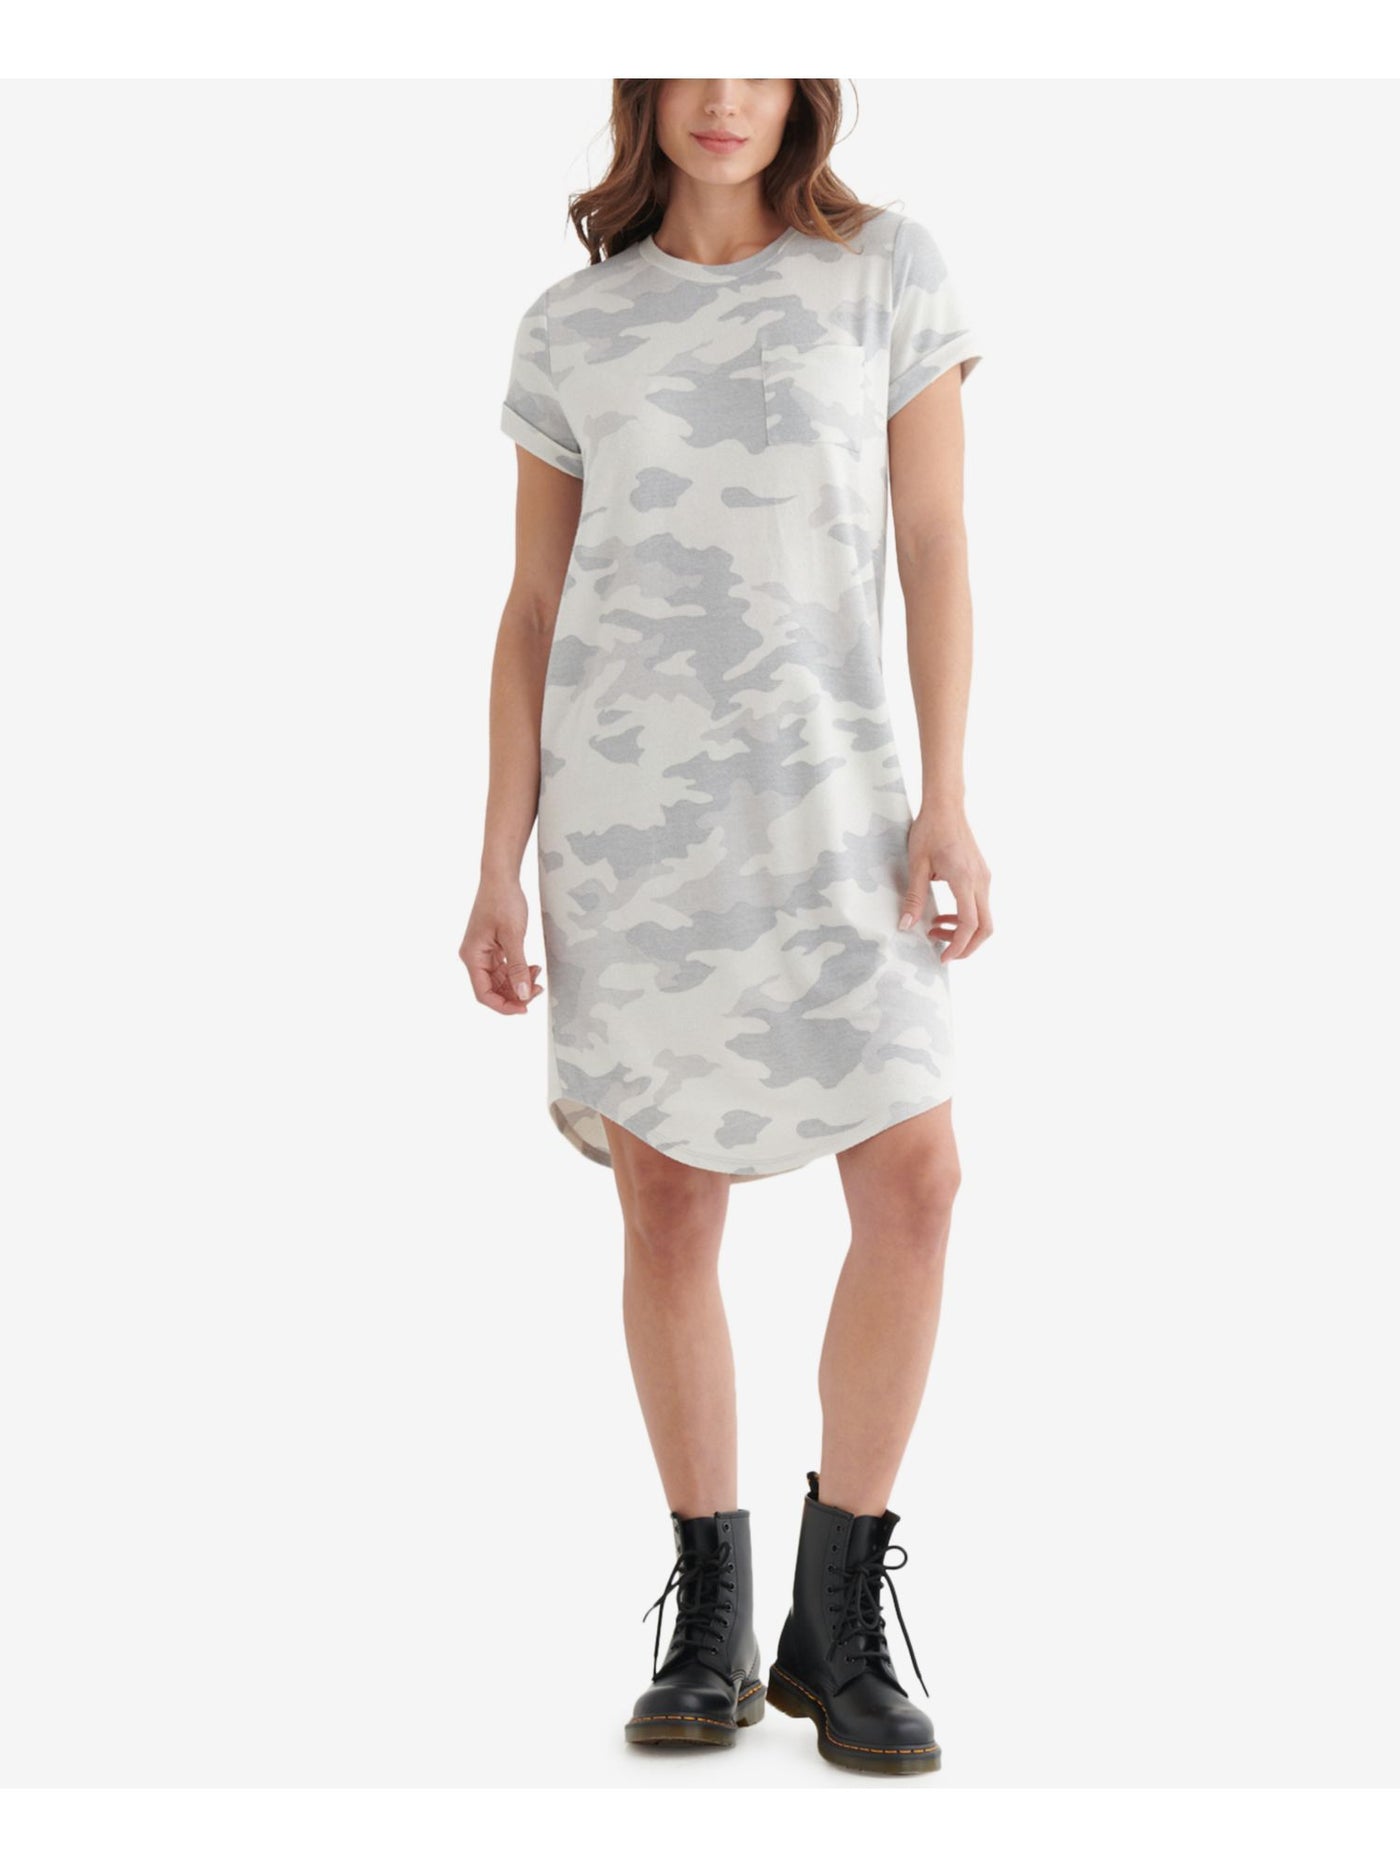 LUCKY BRAND Womens Gray Camouflage Short Sleeve Crew Neck Above The Knee T-Shirt Dress XS